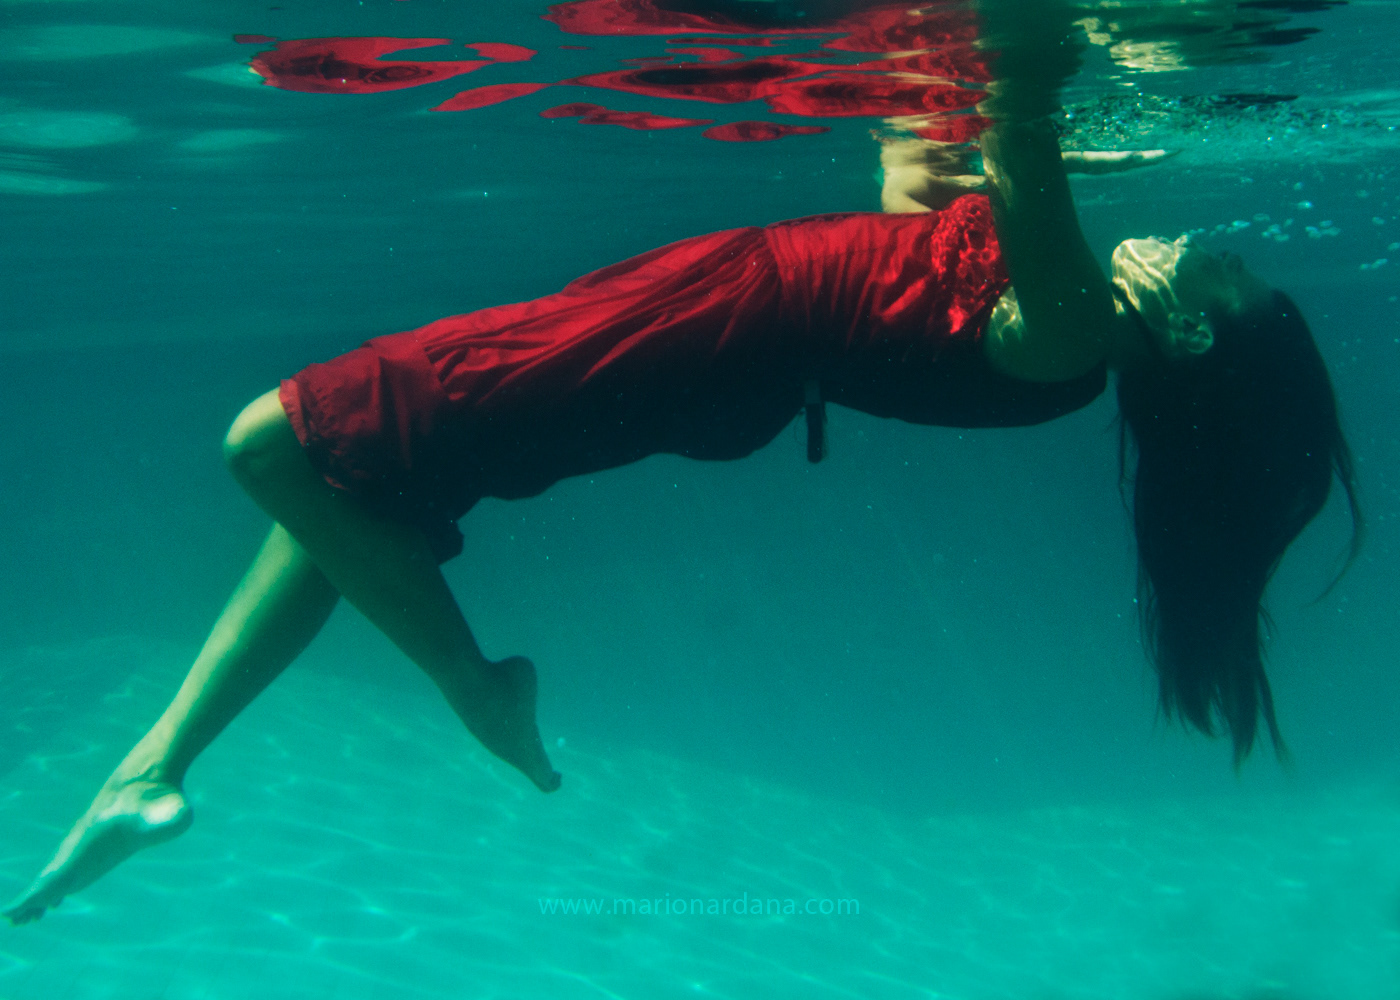 A woman is submerged in a red dress under water.